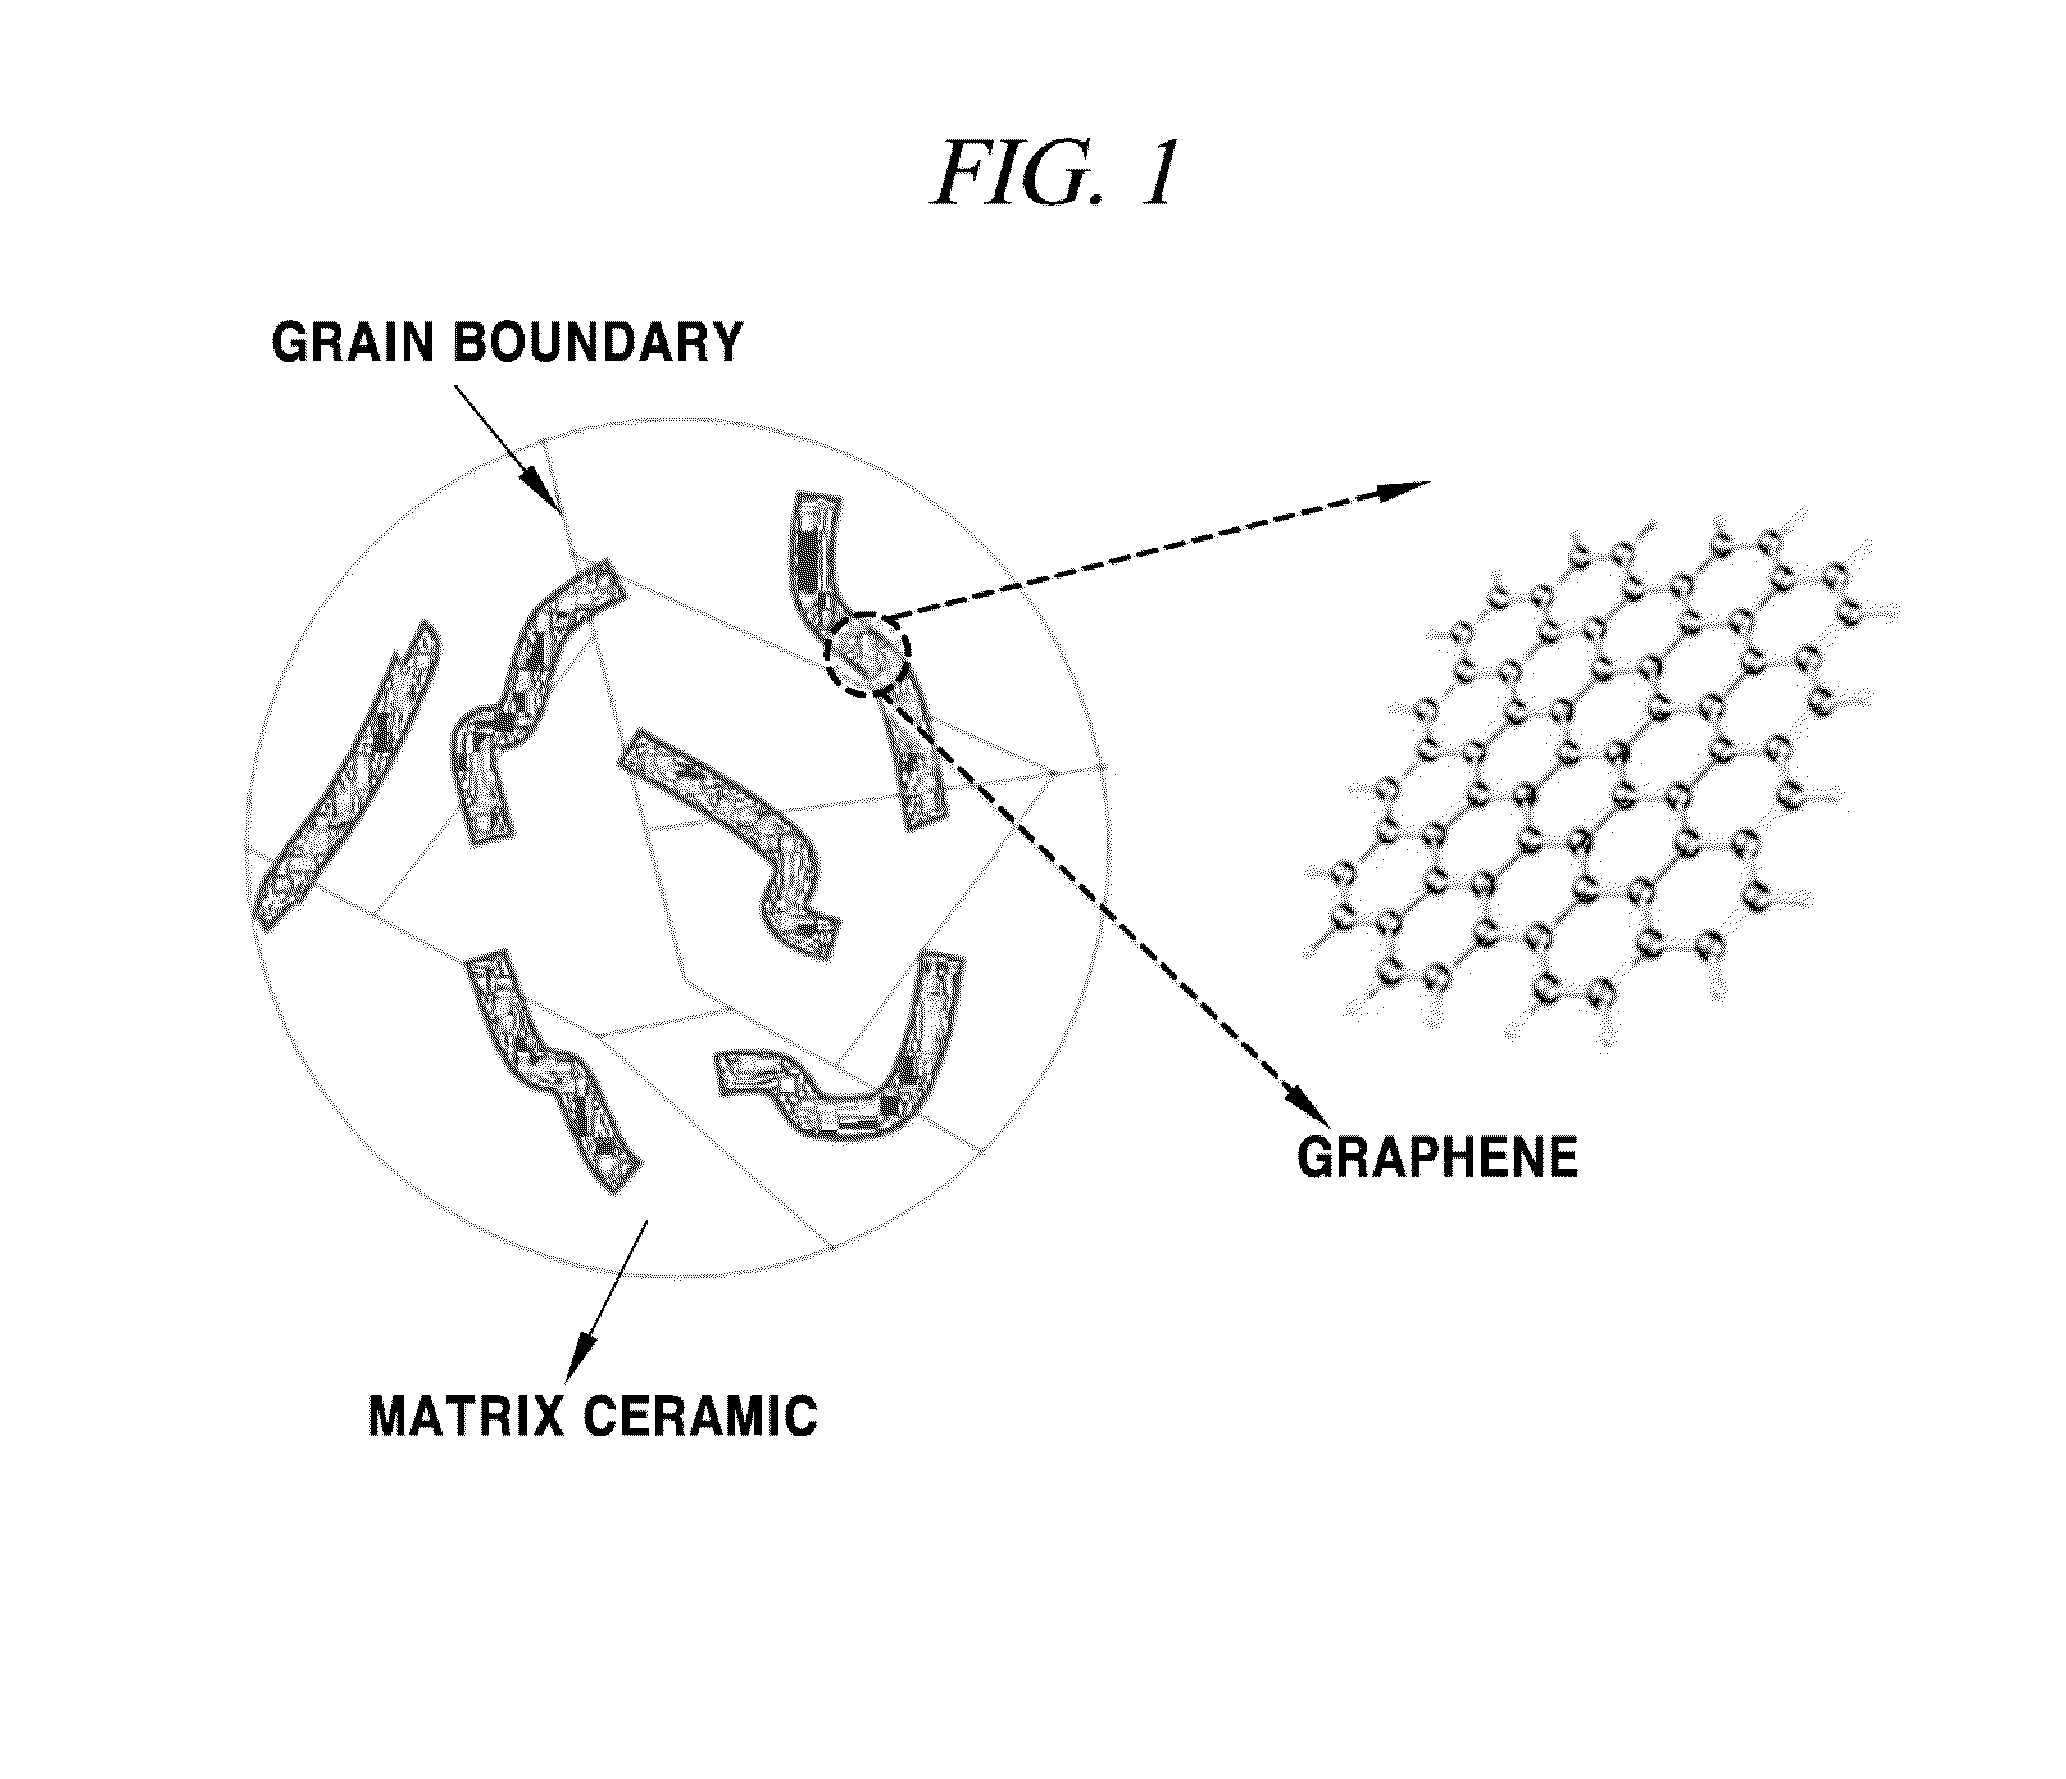 Graphene/ceramic nanocomposite powder and a production method therefor